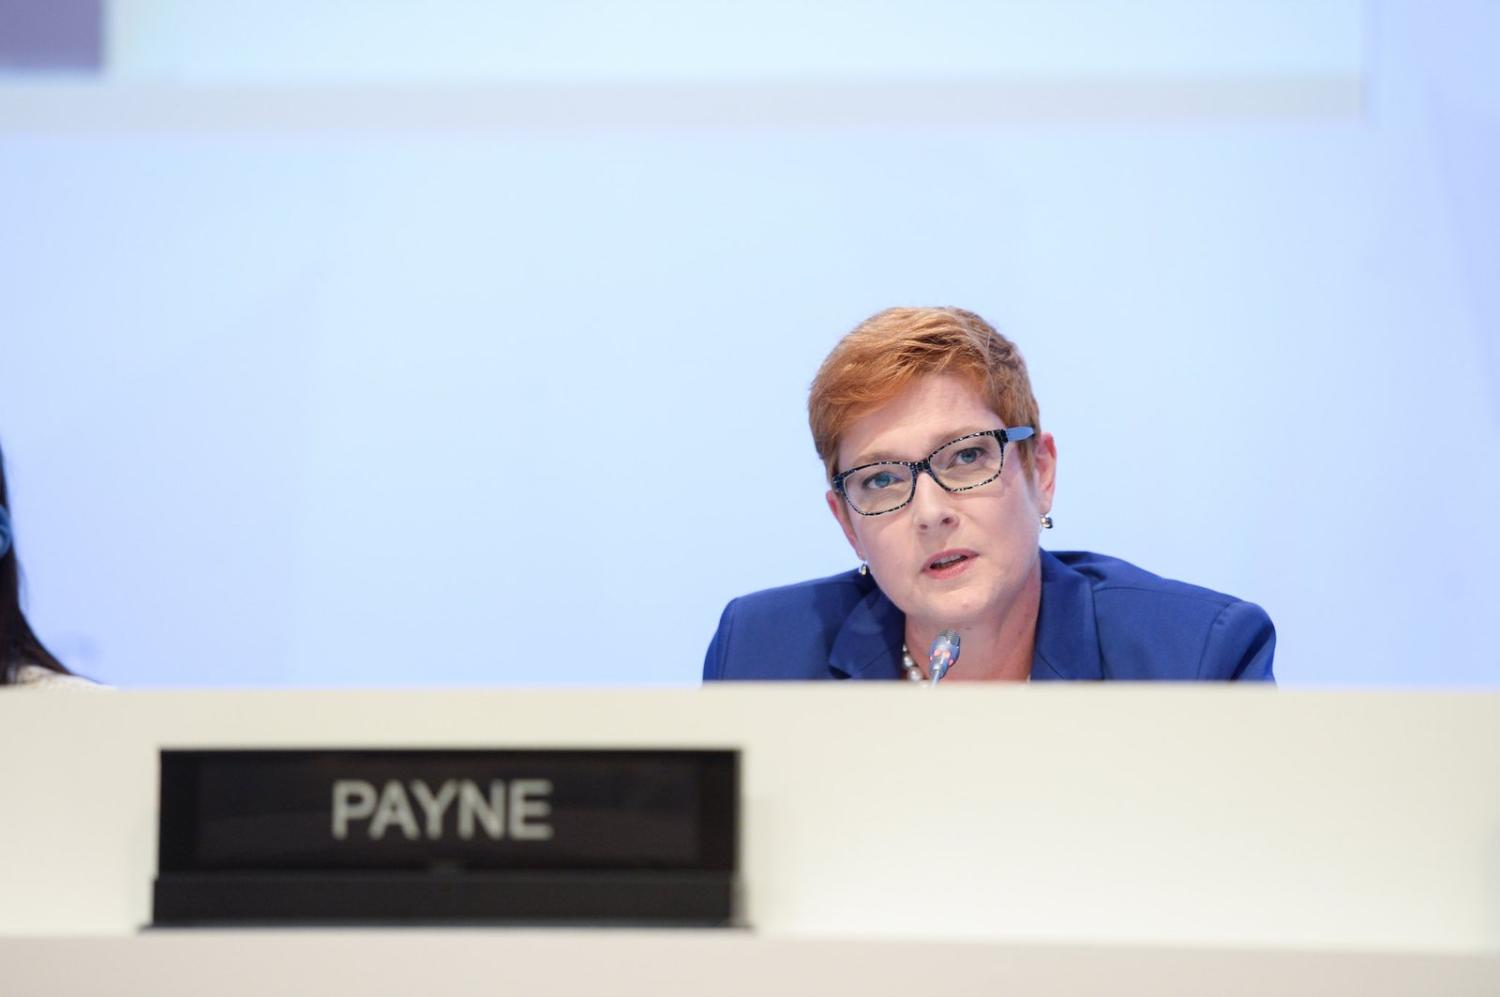 Safe pair of hands: Foreign Minister Marise Payne (Photo: IISS/Flickr)